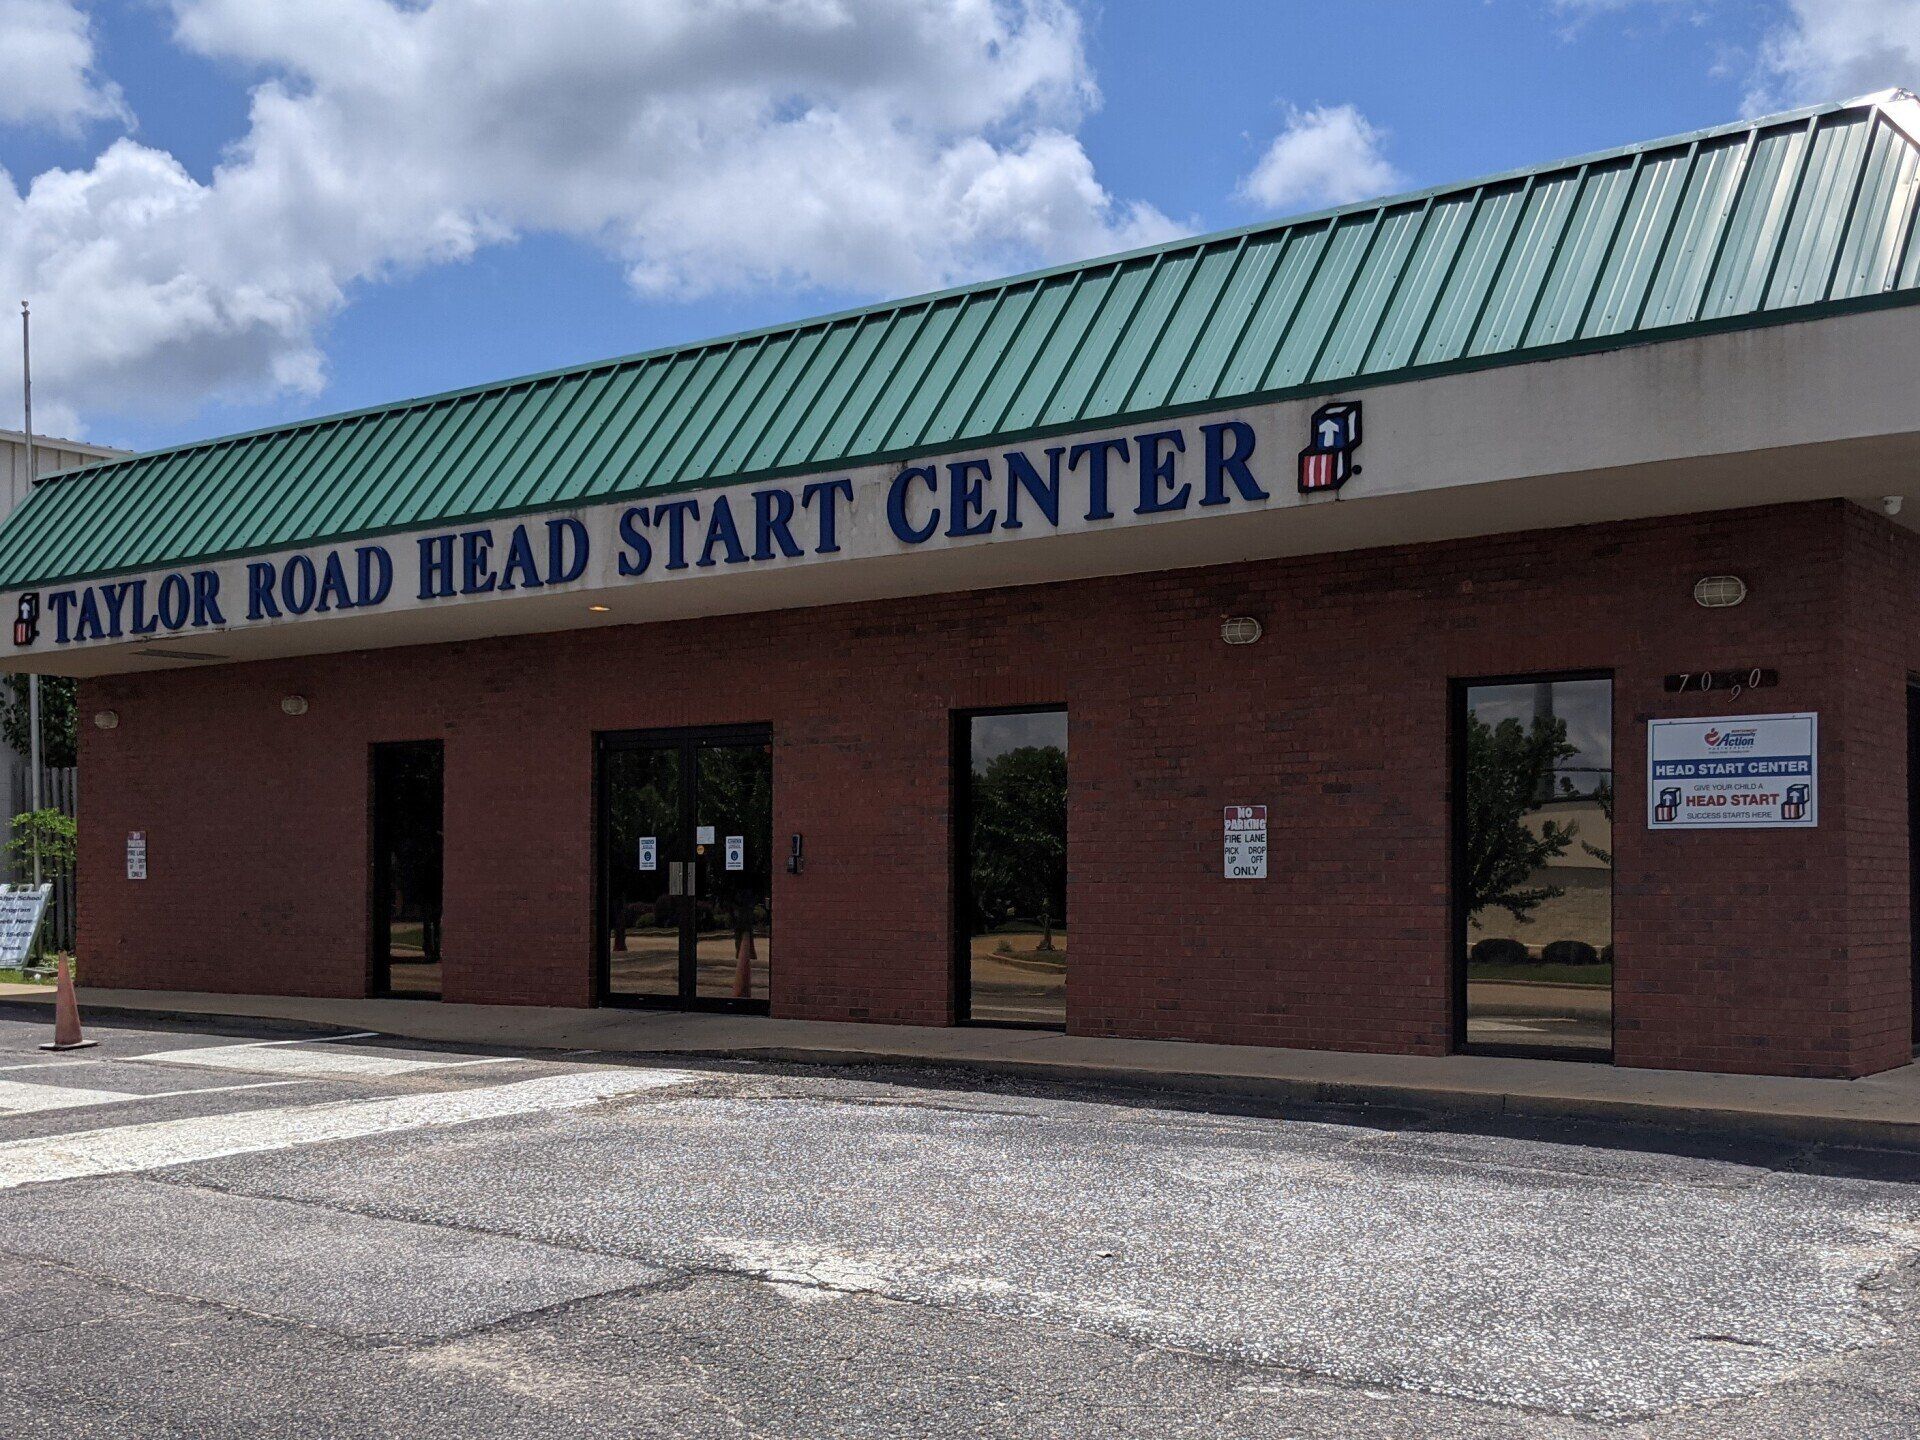 new efficient window treatments - Taylor Road Head Start Center windows were secured with SPF energy efficient tint adding 1-way privacy to glass doors and windows in Montgomery, AL